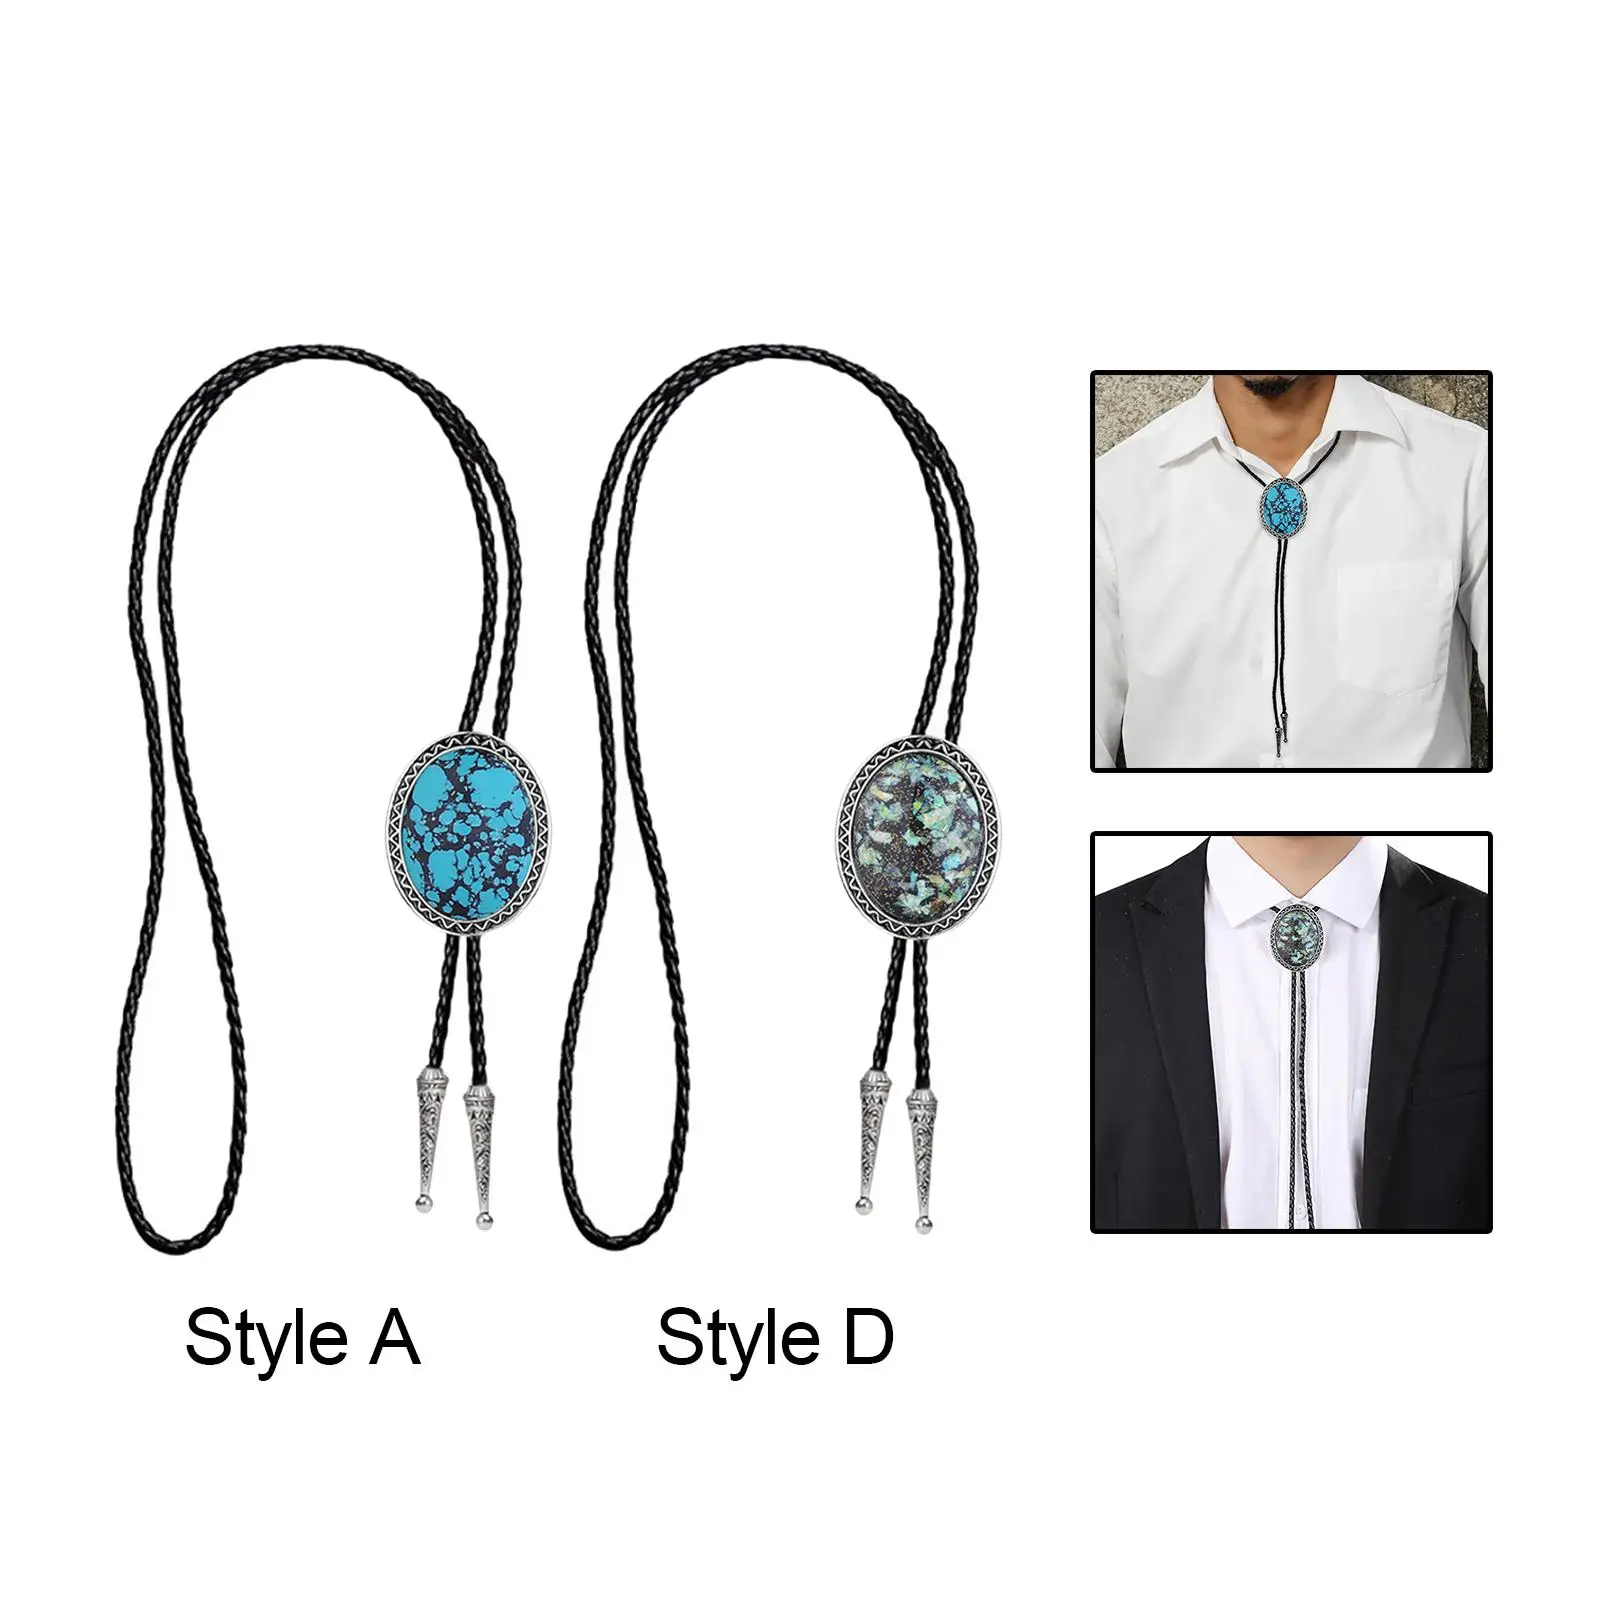 Alloy Mens Bolo Tie Accessories Braided Leather Lanyard Oval Stone Rope Neck Rope for Jazz Hat Halloween Birthday Graduation